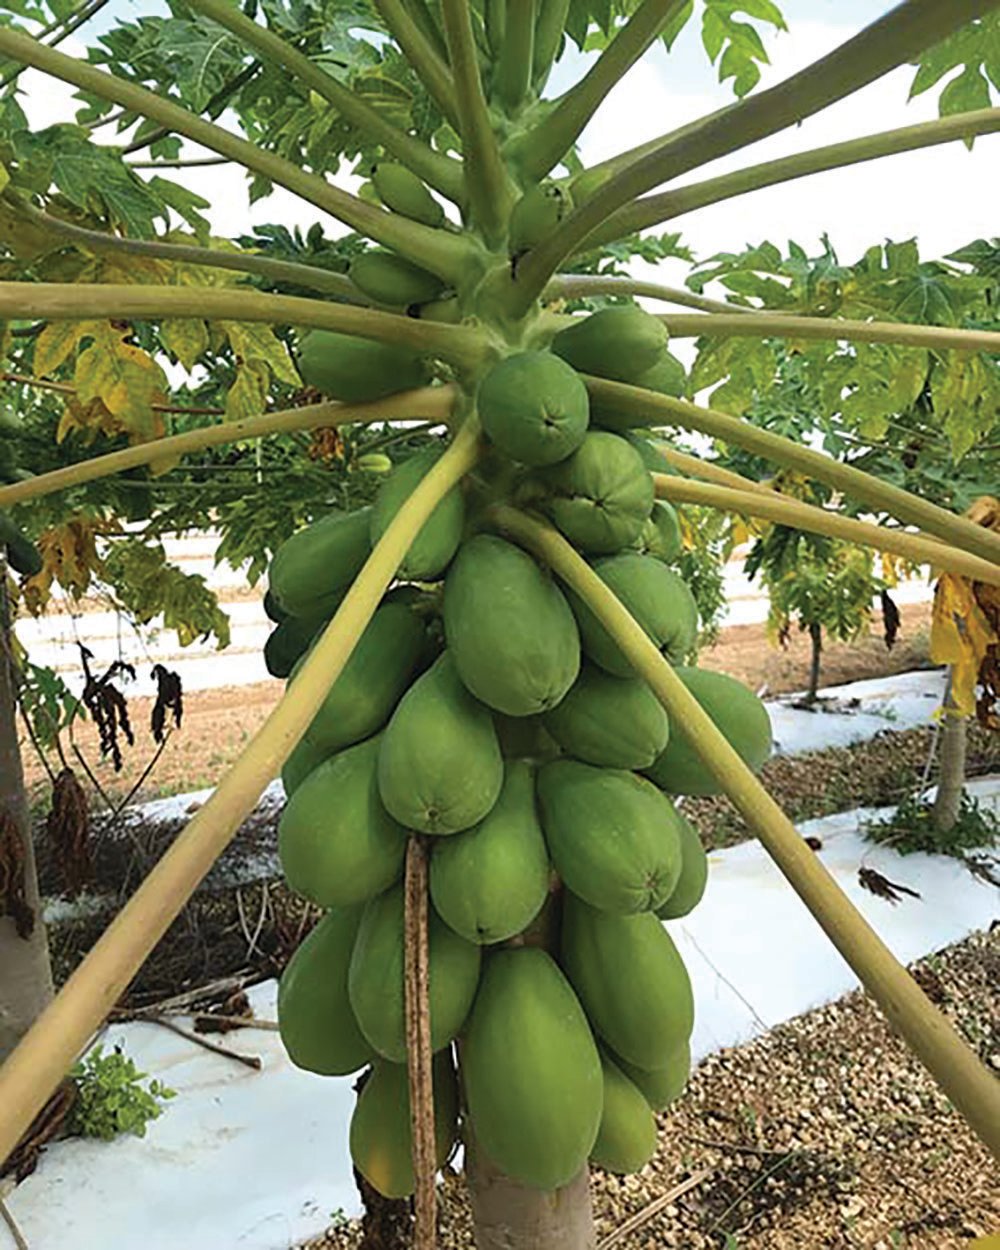 Solo papaya are worth more than common papayas, and they have a superior flavor.